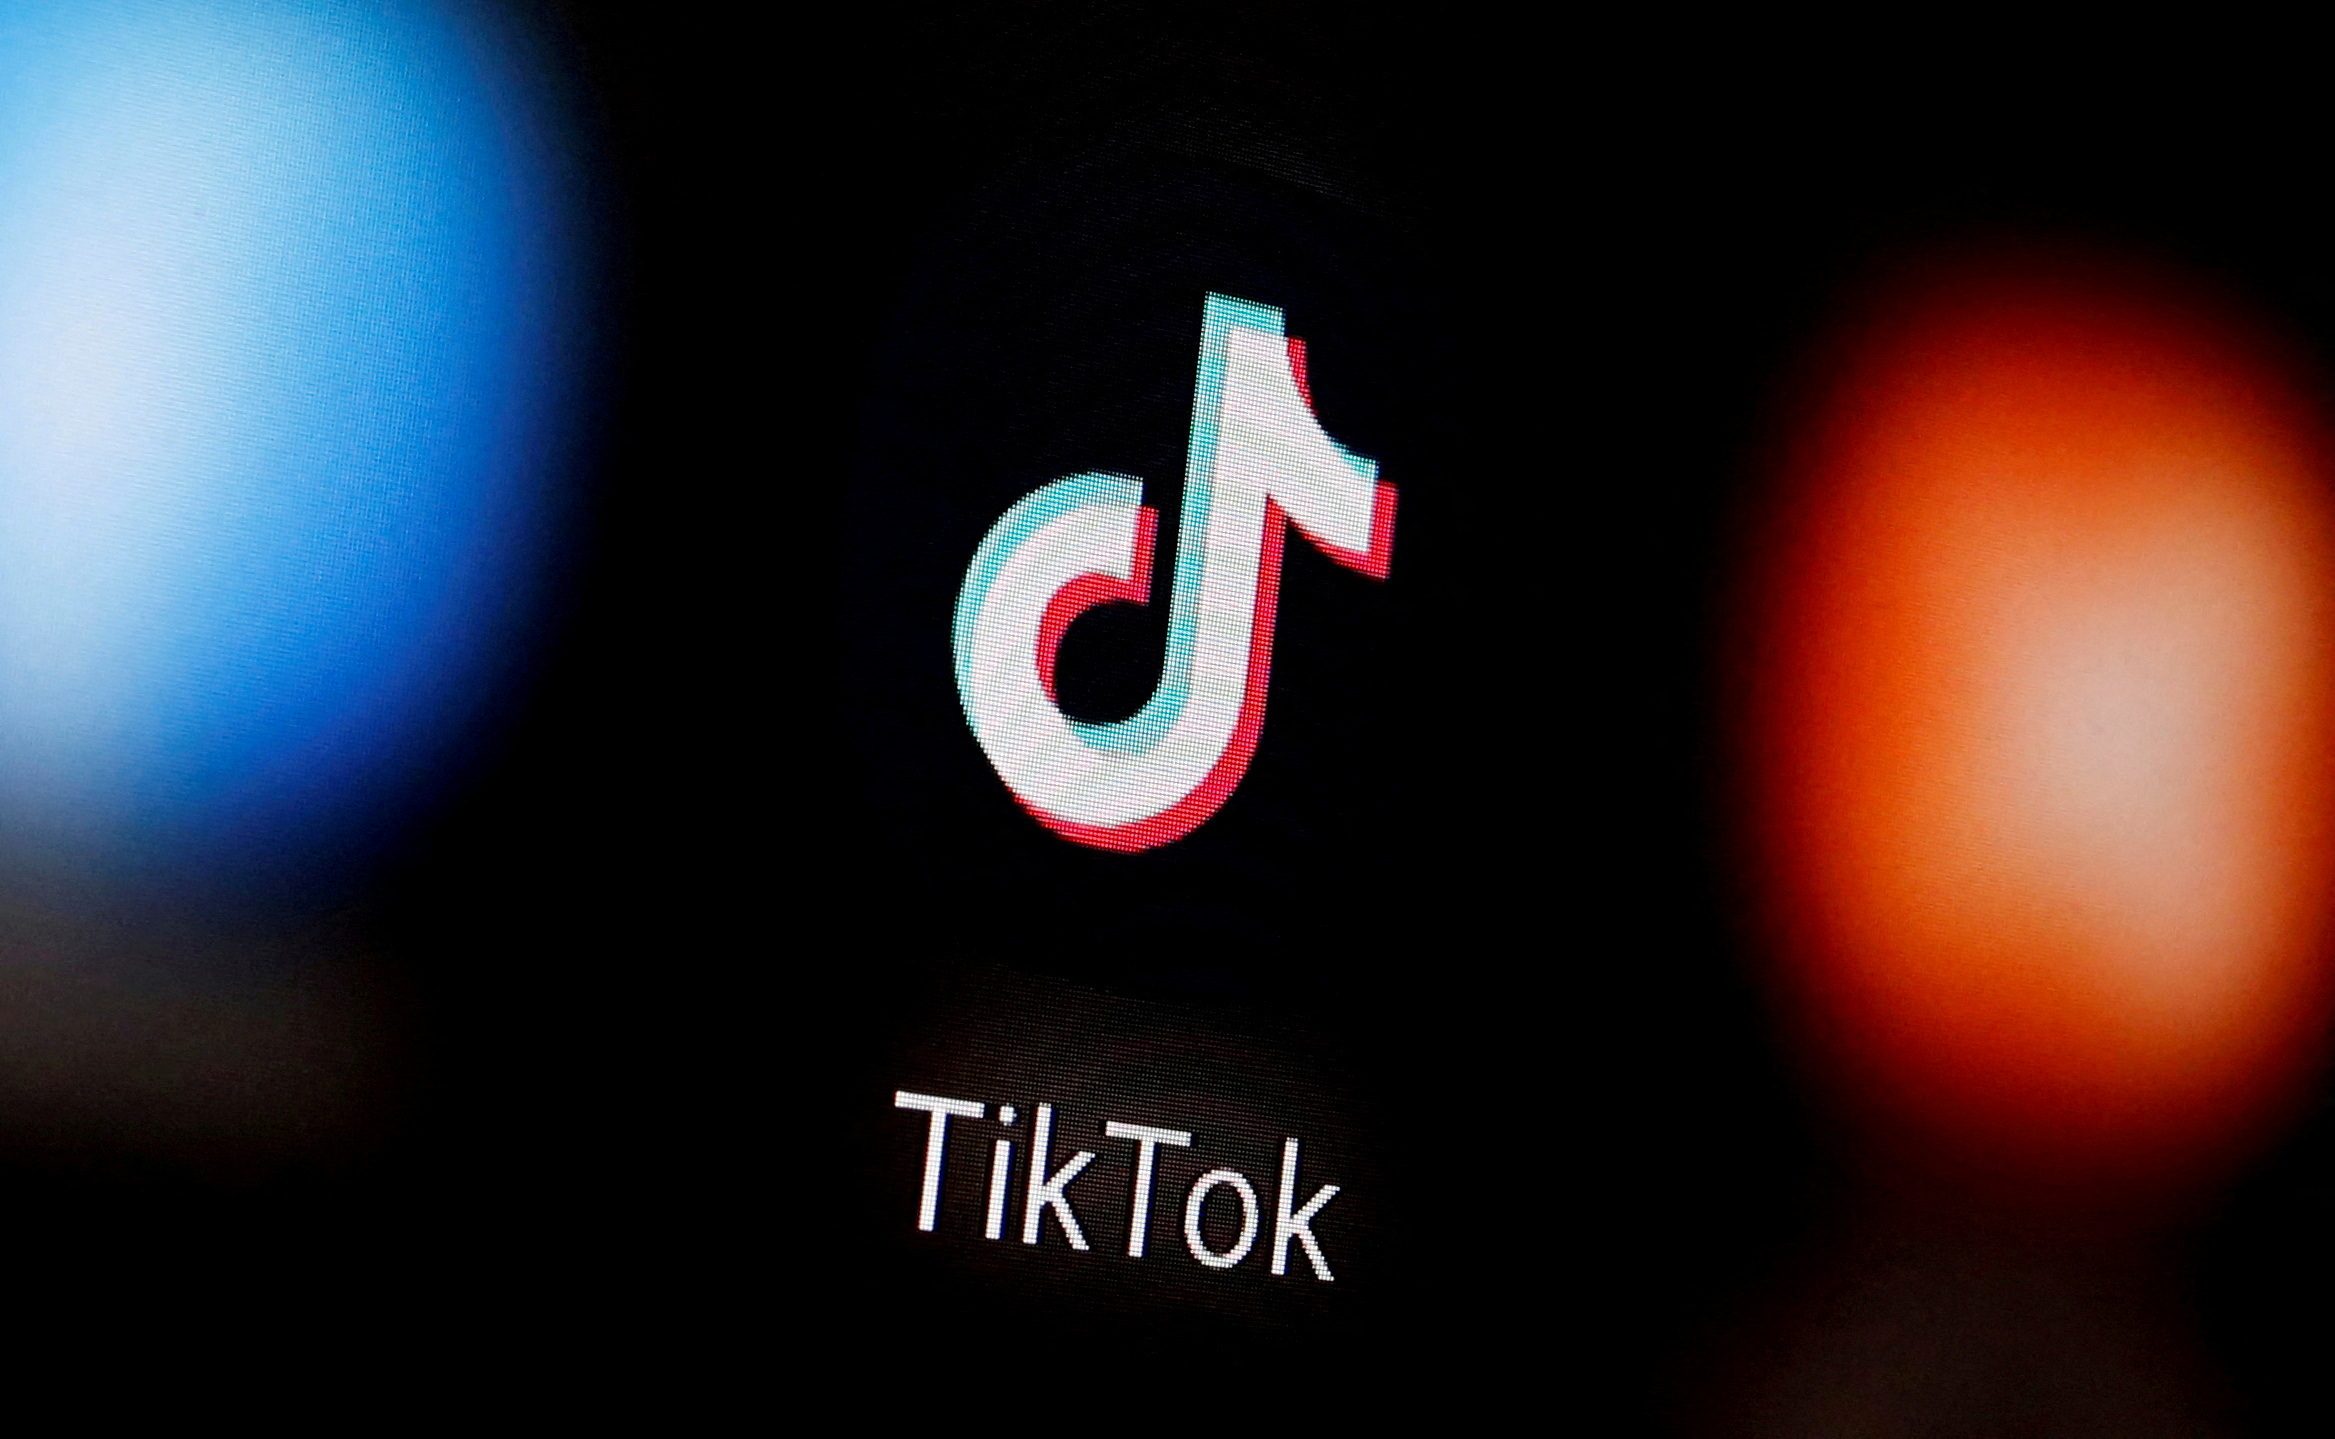 TikTok moves onto Amazon's turf with in-app e-commerce service in the US